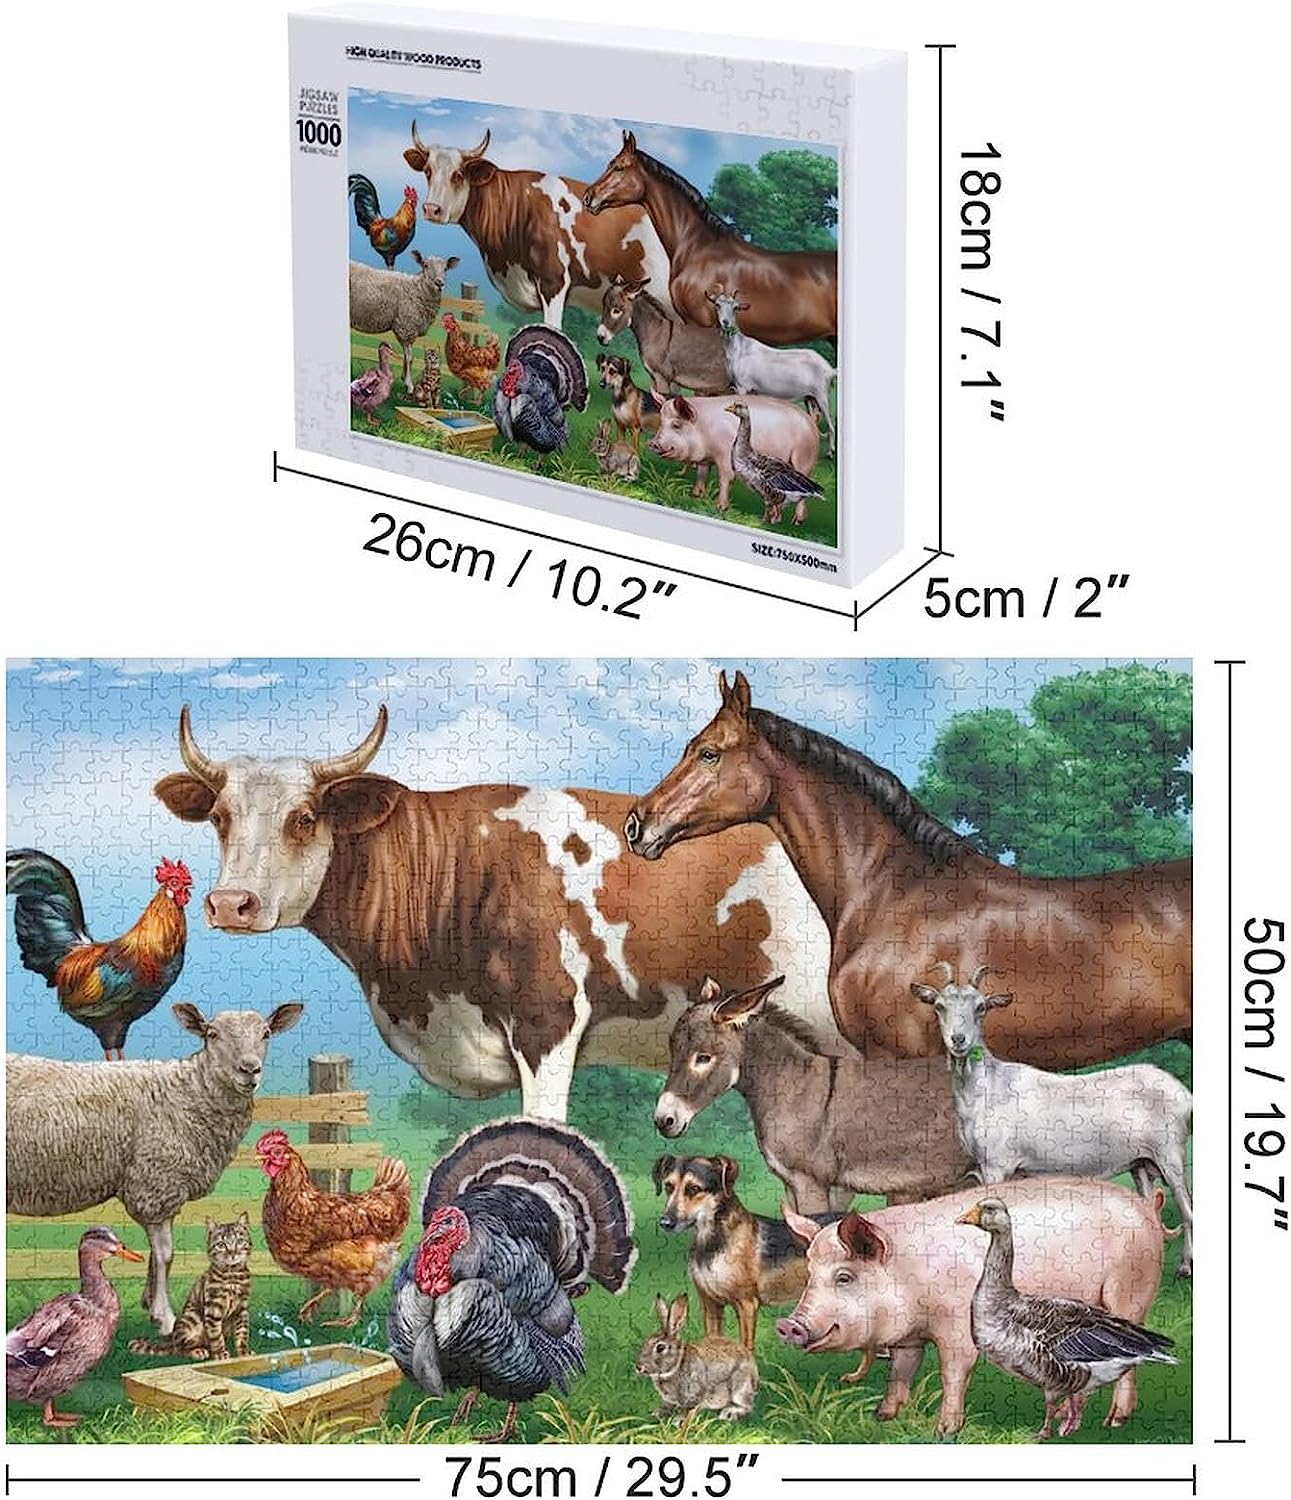 Pets Farm Animals Puzzle for Adults Wooden Stress Relief Jigsaw Puzzles Challenging Large Floor Picture Game Intellectual Decompression Entertainment Game 300 Piece 500 Piece 1000 Piece